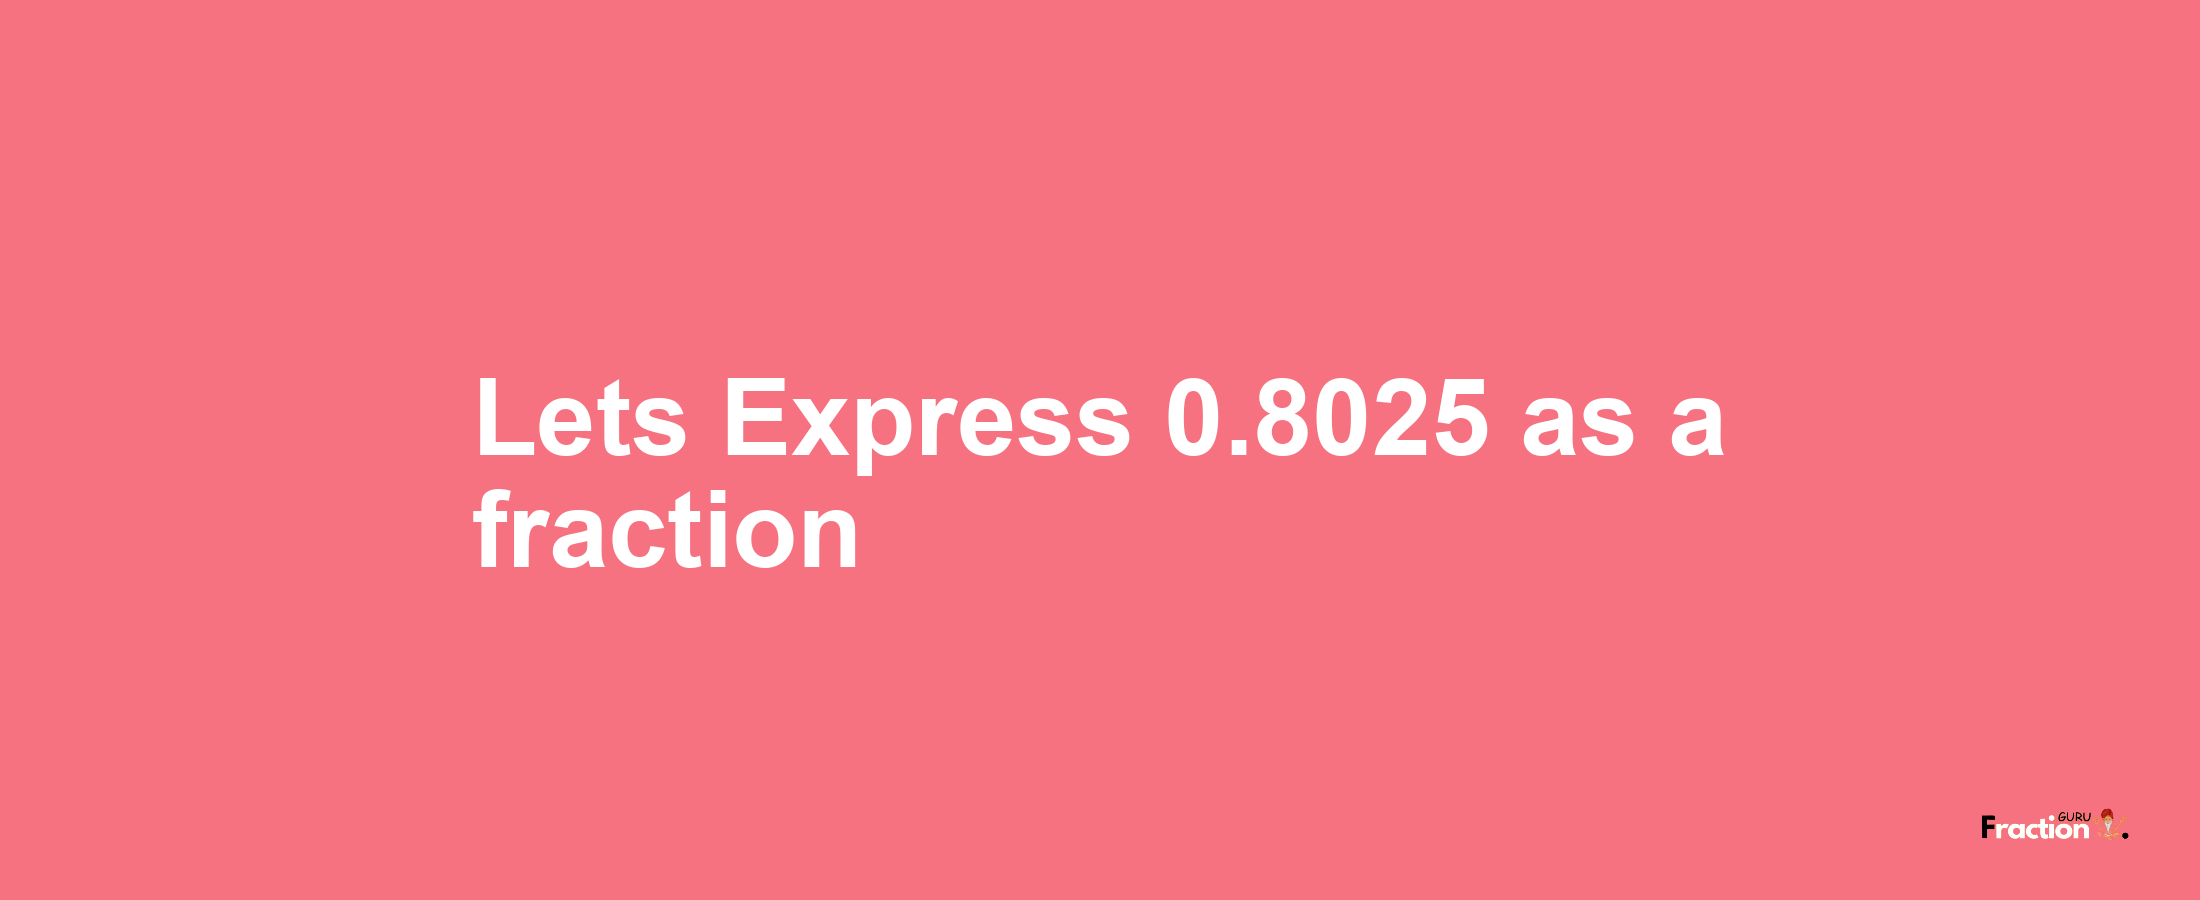 Lets Express 0.8025 as afraction